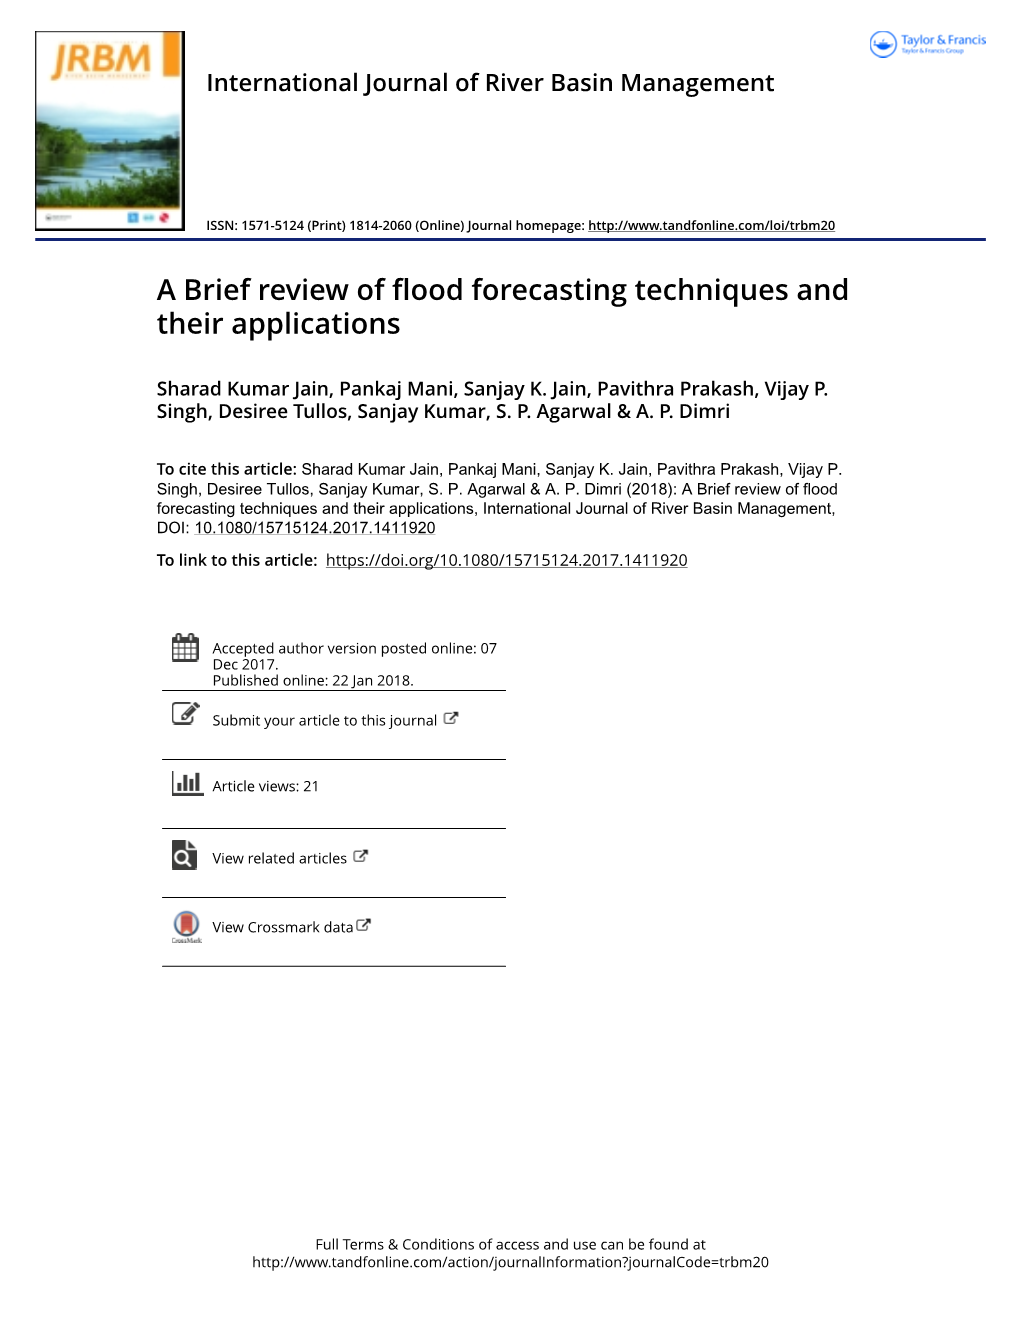 A Brief Review of Flood Forecasting Techniques and Their Applications